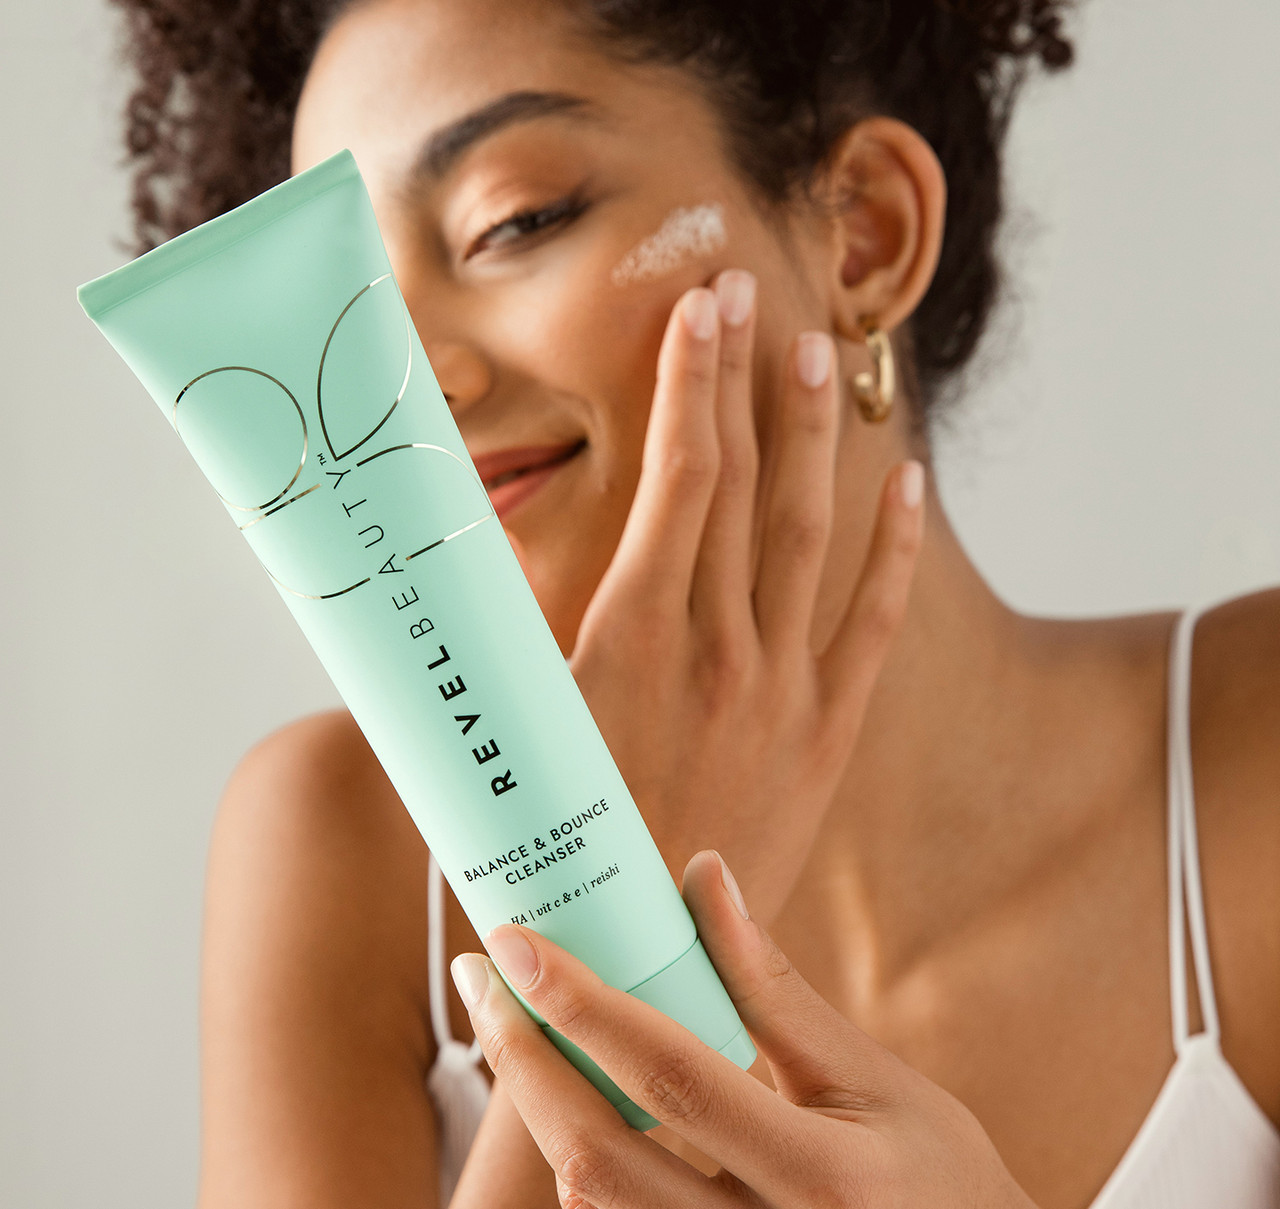 The go-to cleanser for a peachy keen, fresh & clean face